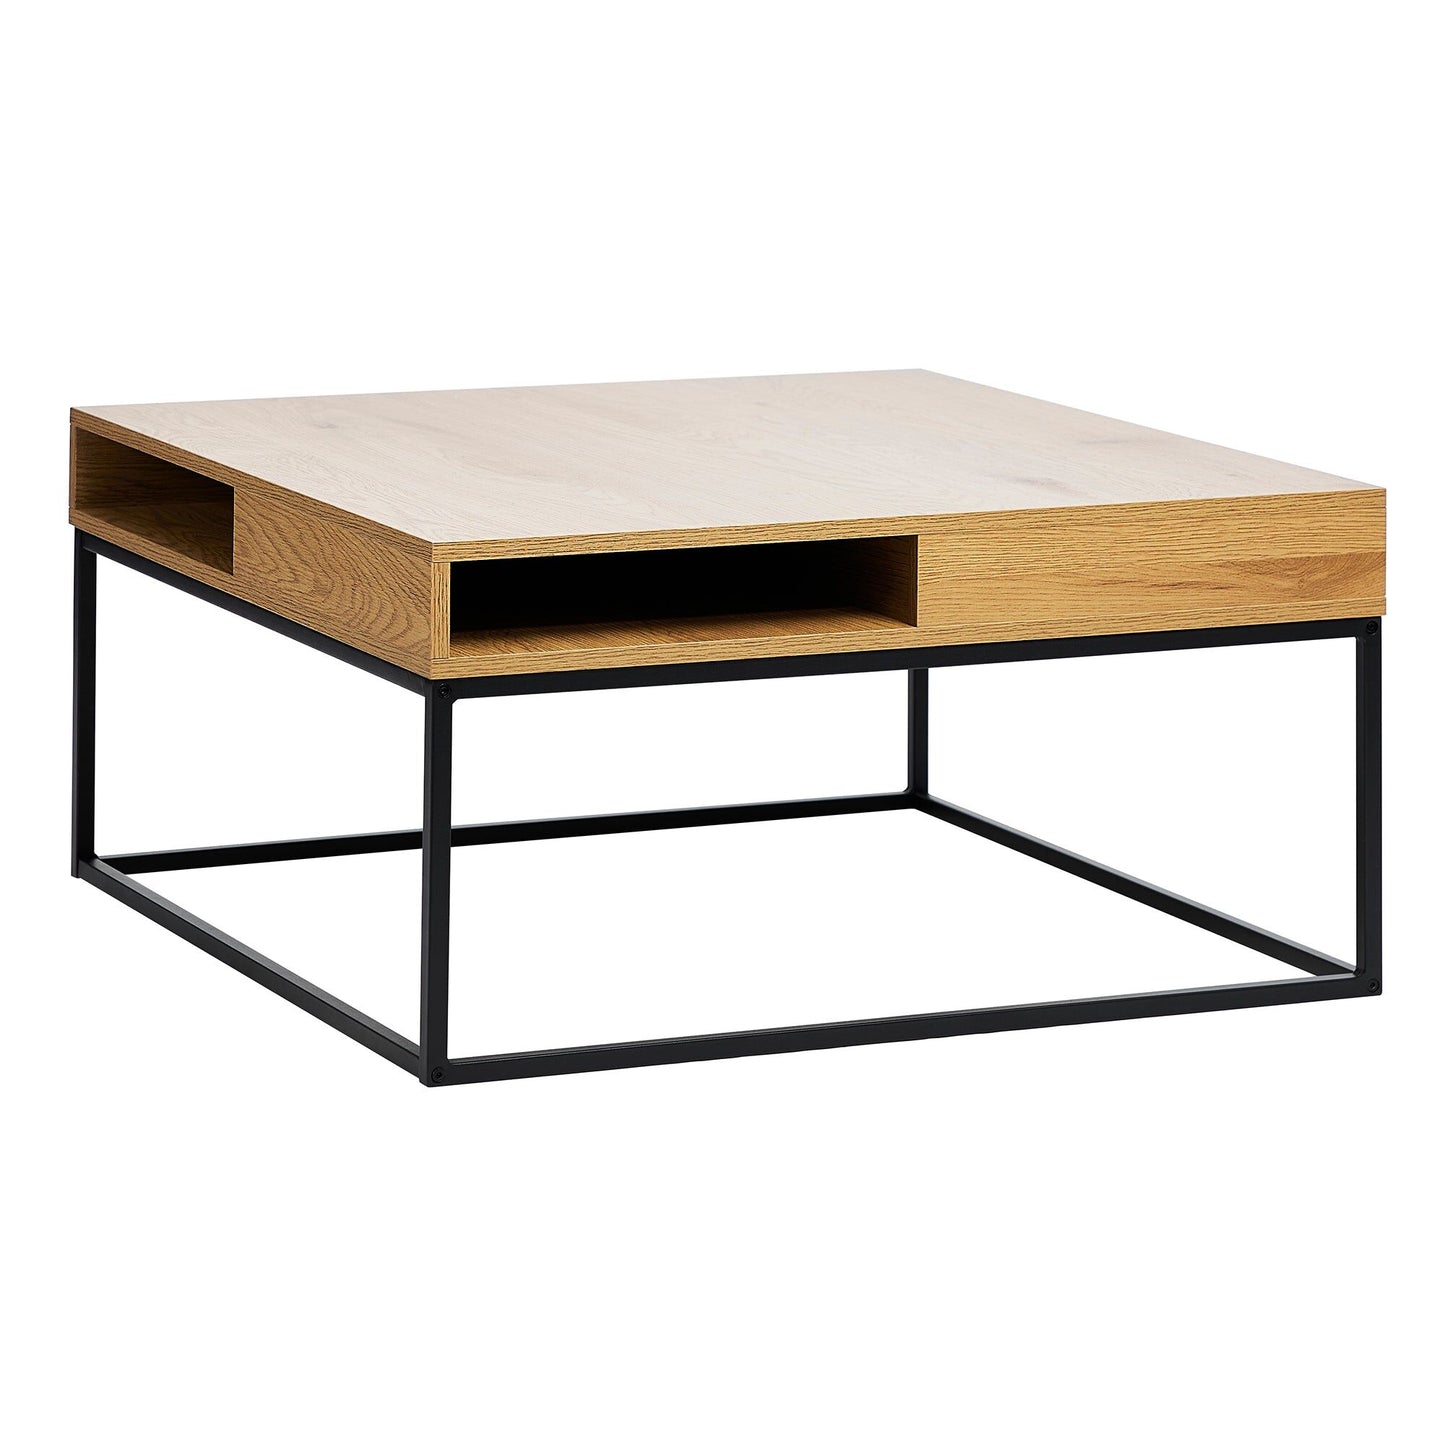 Cooper & Co. 80cm Square Wales Coffee Table Natural